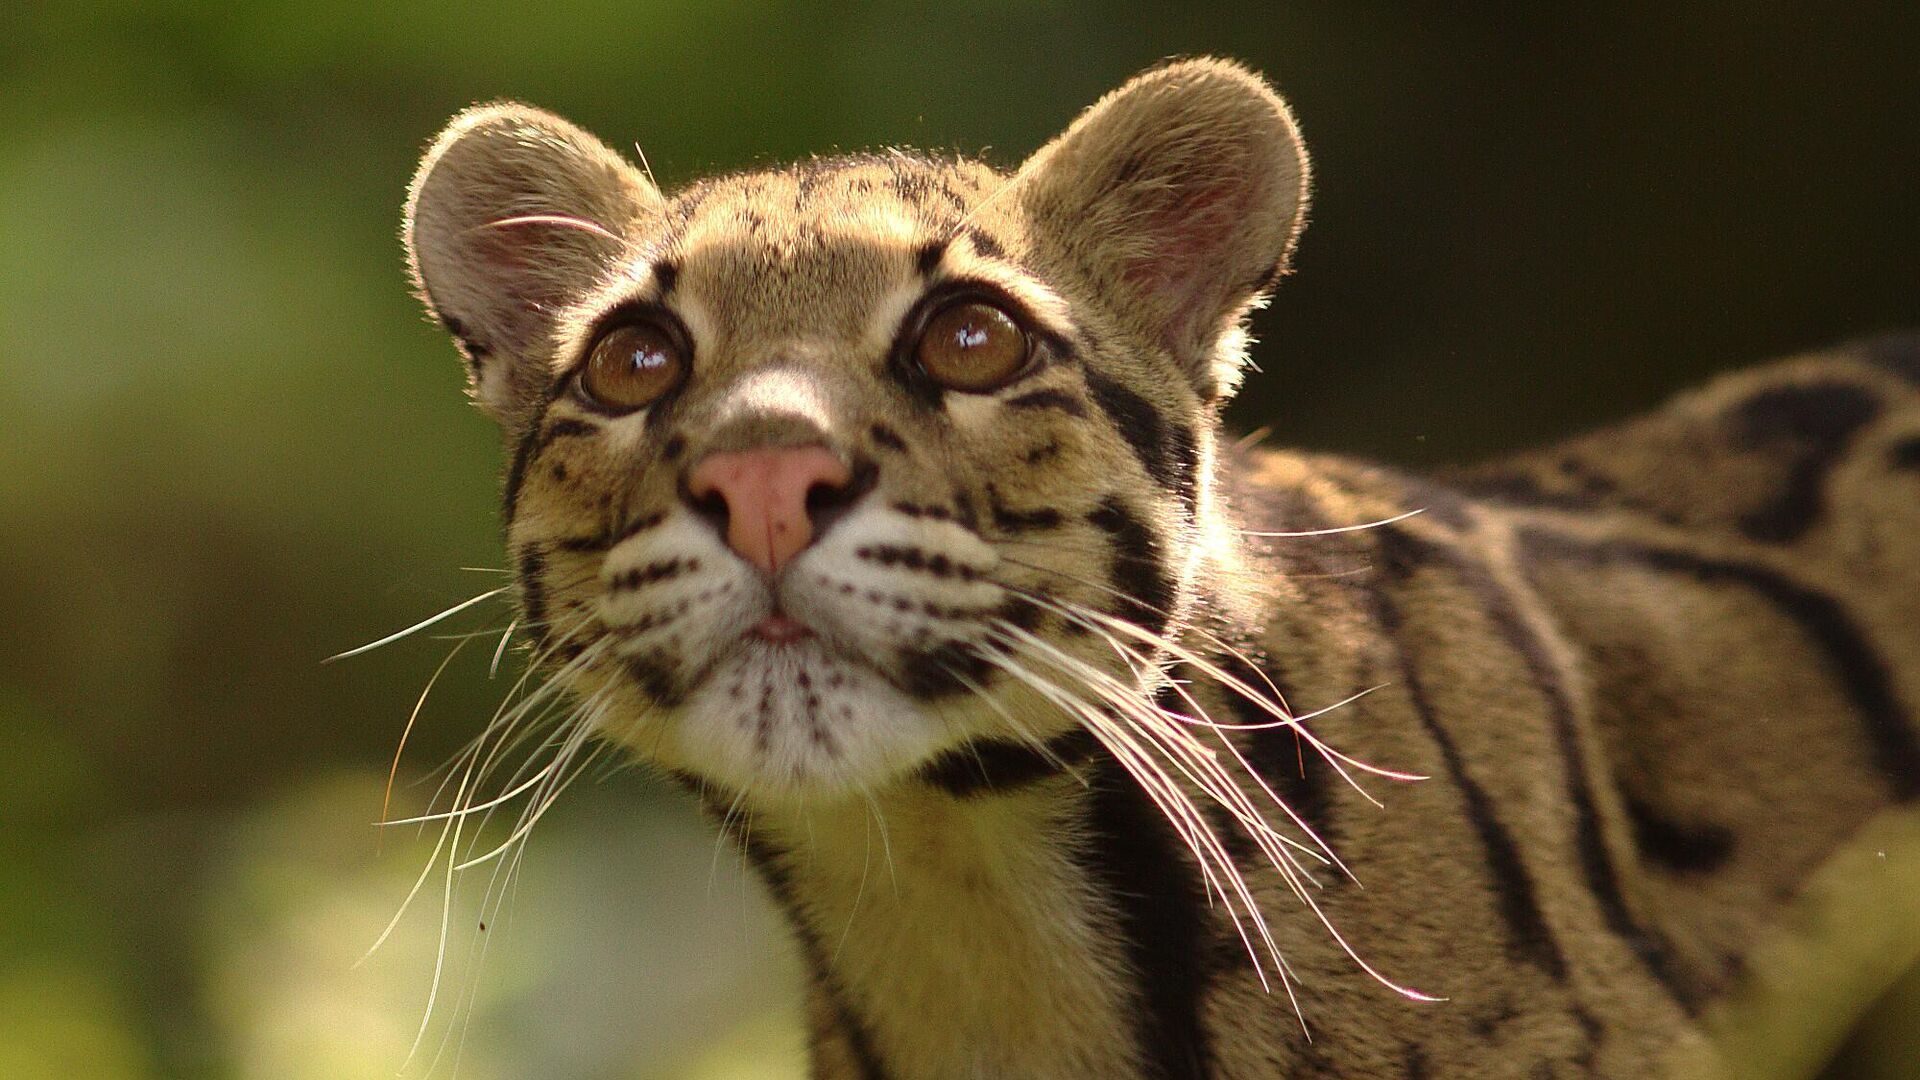 A Serious Situation': Dallas Zoo Temporarily Shutters After Clouded Leopard  Escapes Enclosure - 13.01.2023, Sputnik International